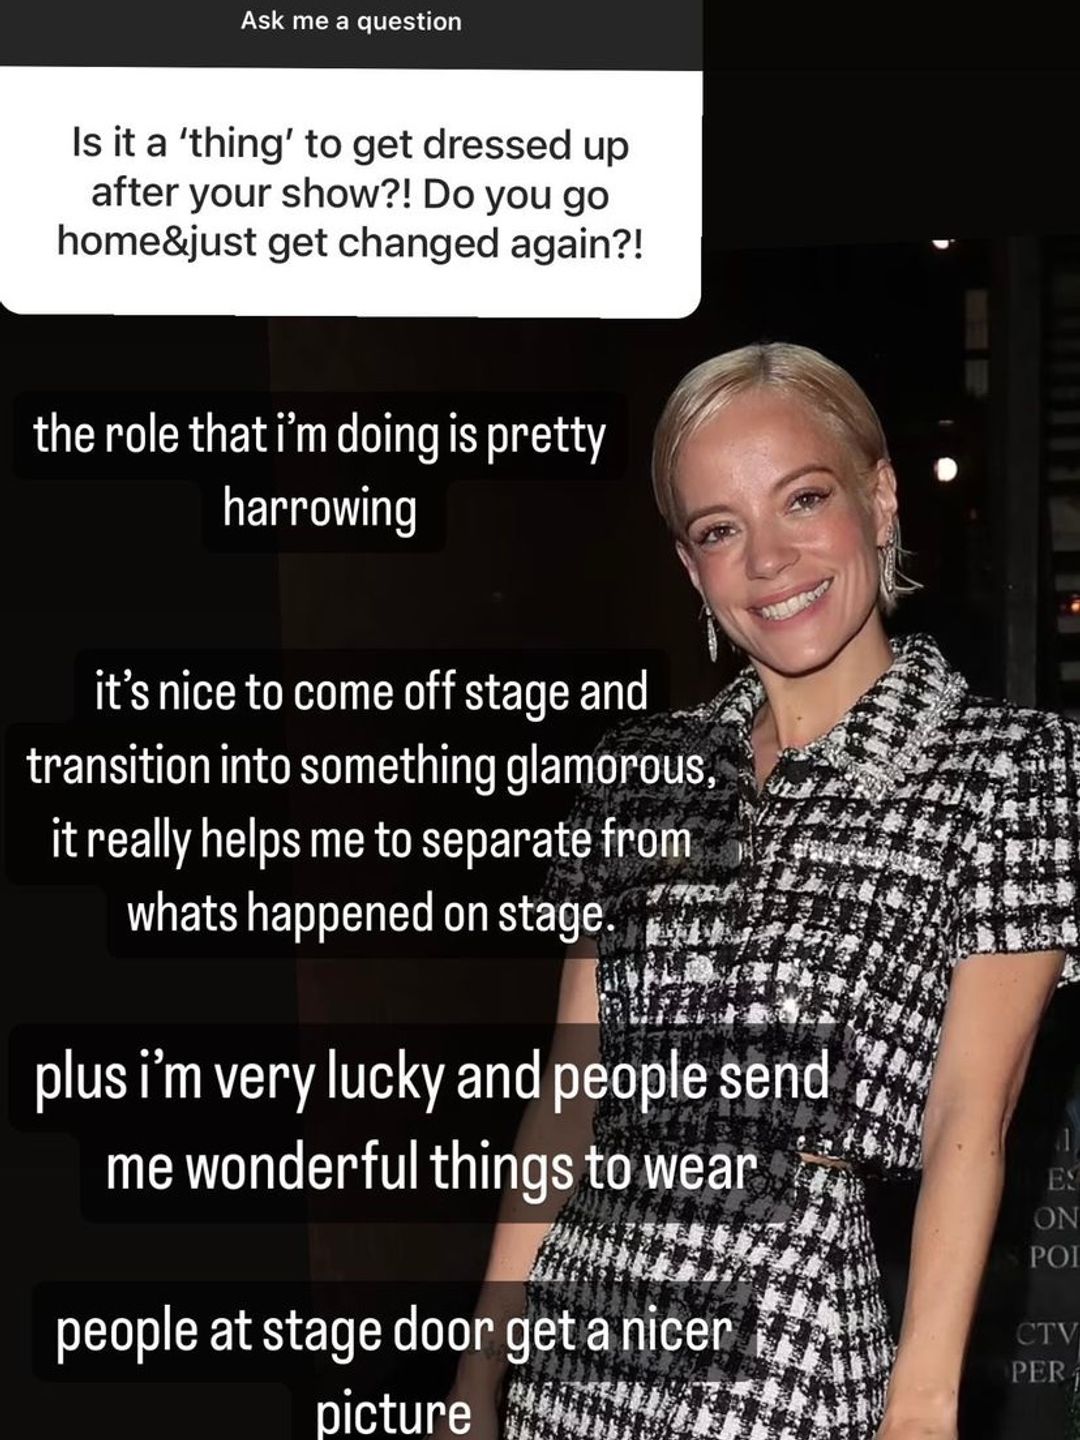 Lily Allen Instagram Story explaining why she likes getting dressed up after a performance